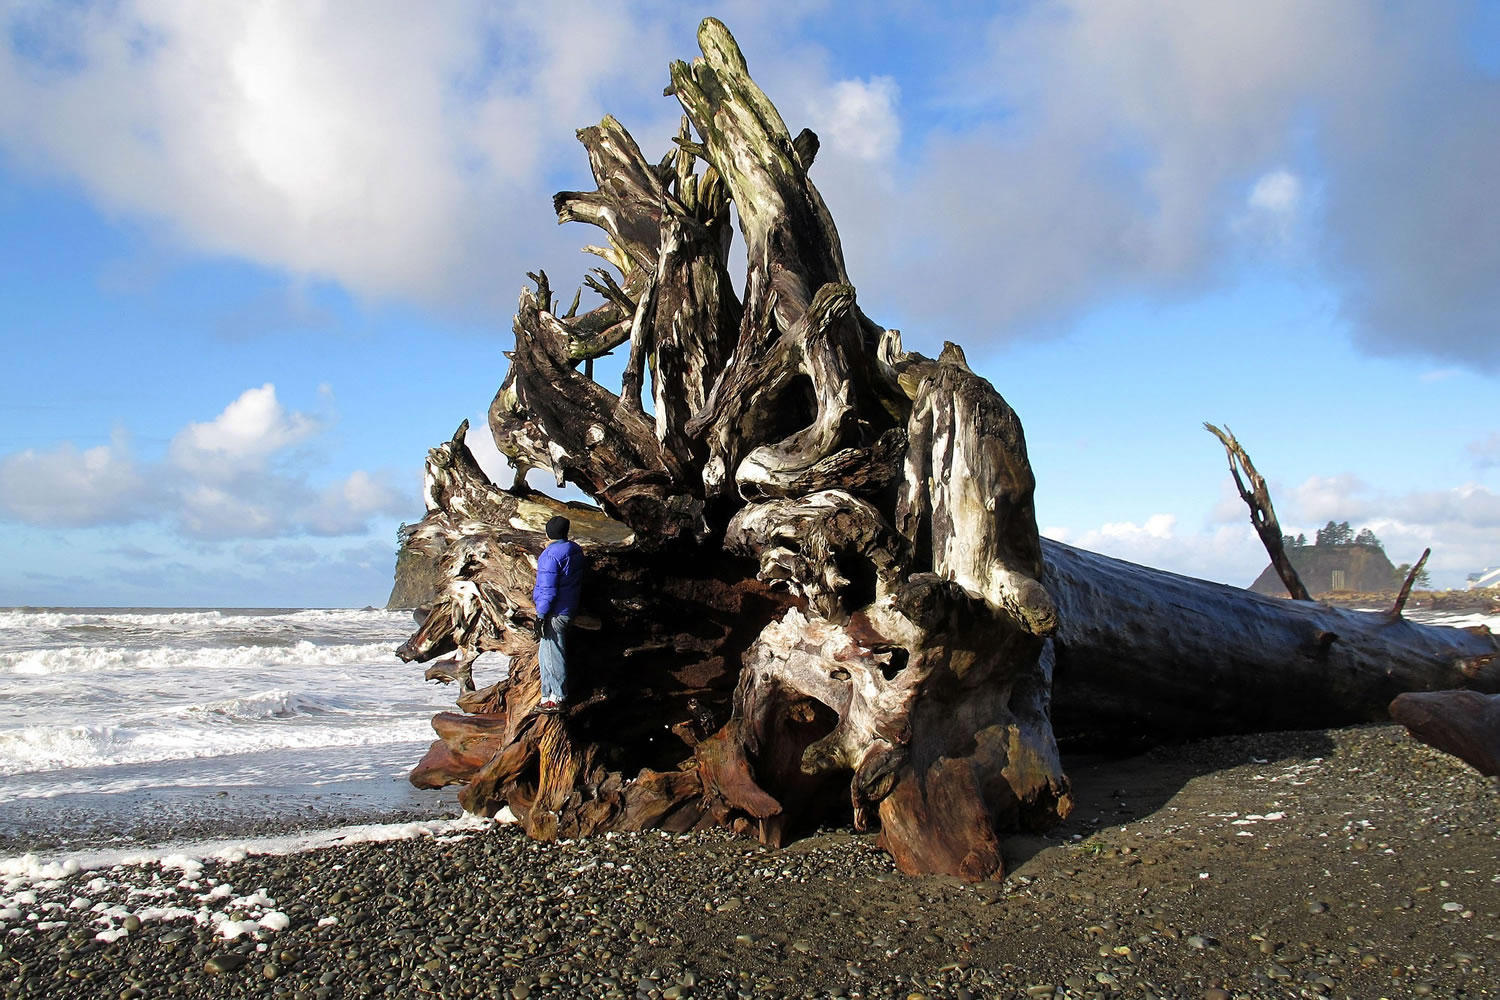 After a storm, the sun sometimes emerges at First Beach in La Push, on the Olympic Peninsula, where a visitor clambers on massive driftwood.